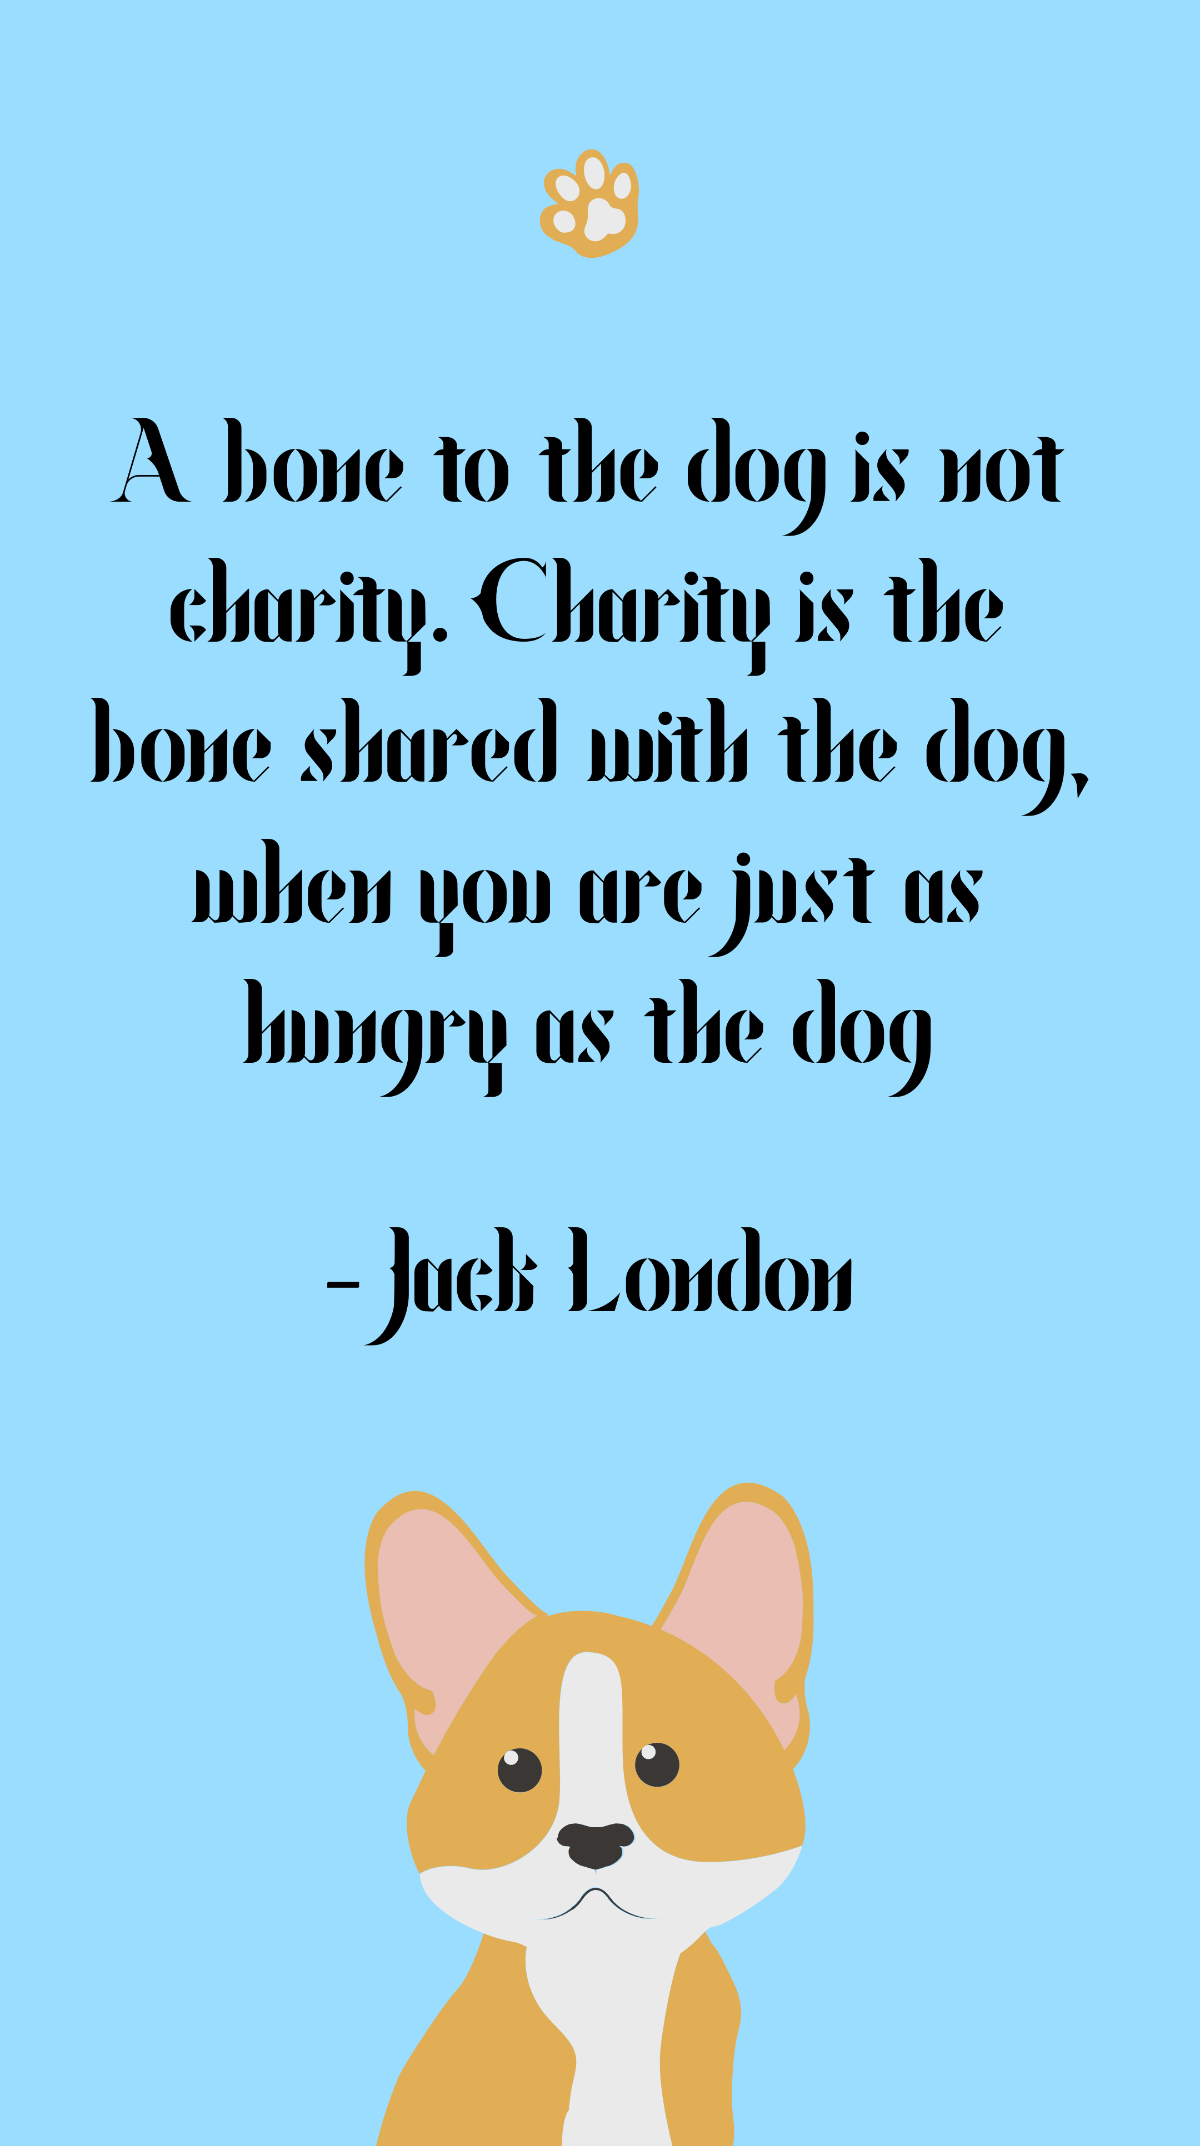 Jack London - A bone to the dog is not charity. Charity is the bone shared with the dog, when you are just as hungry as the dog Template